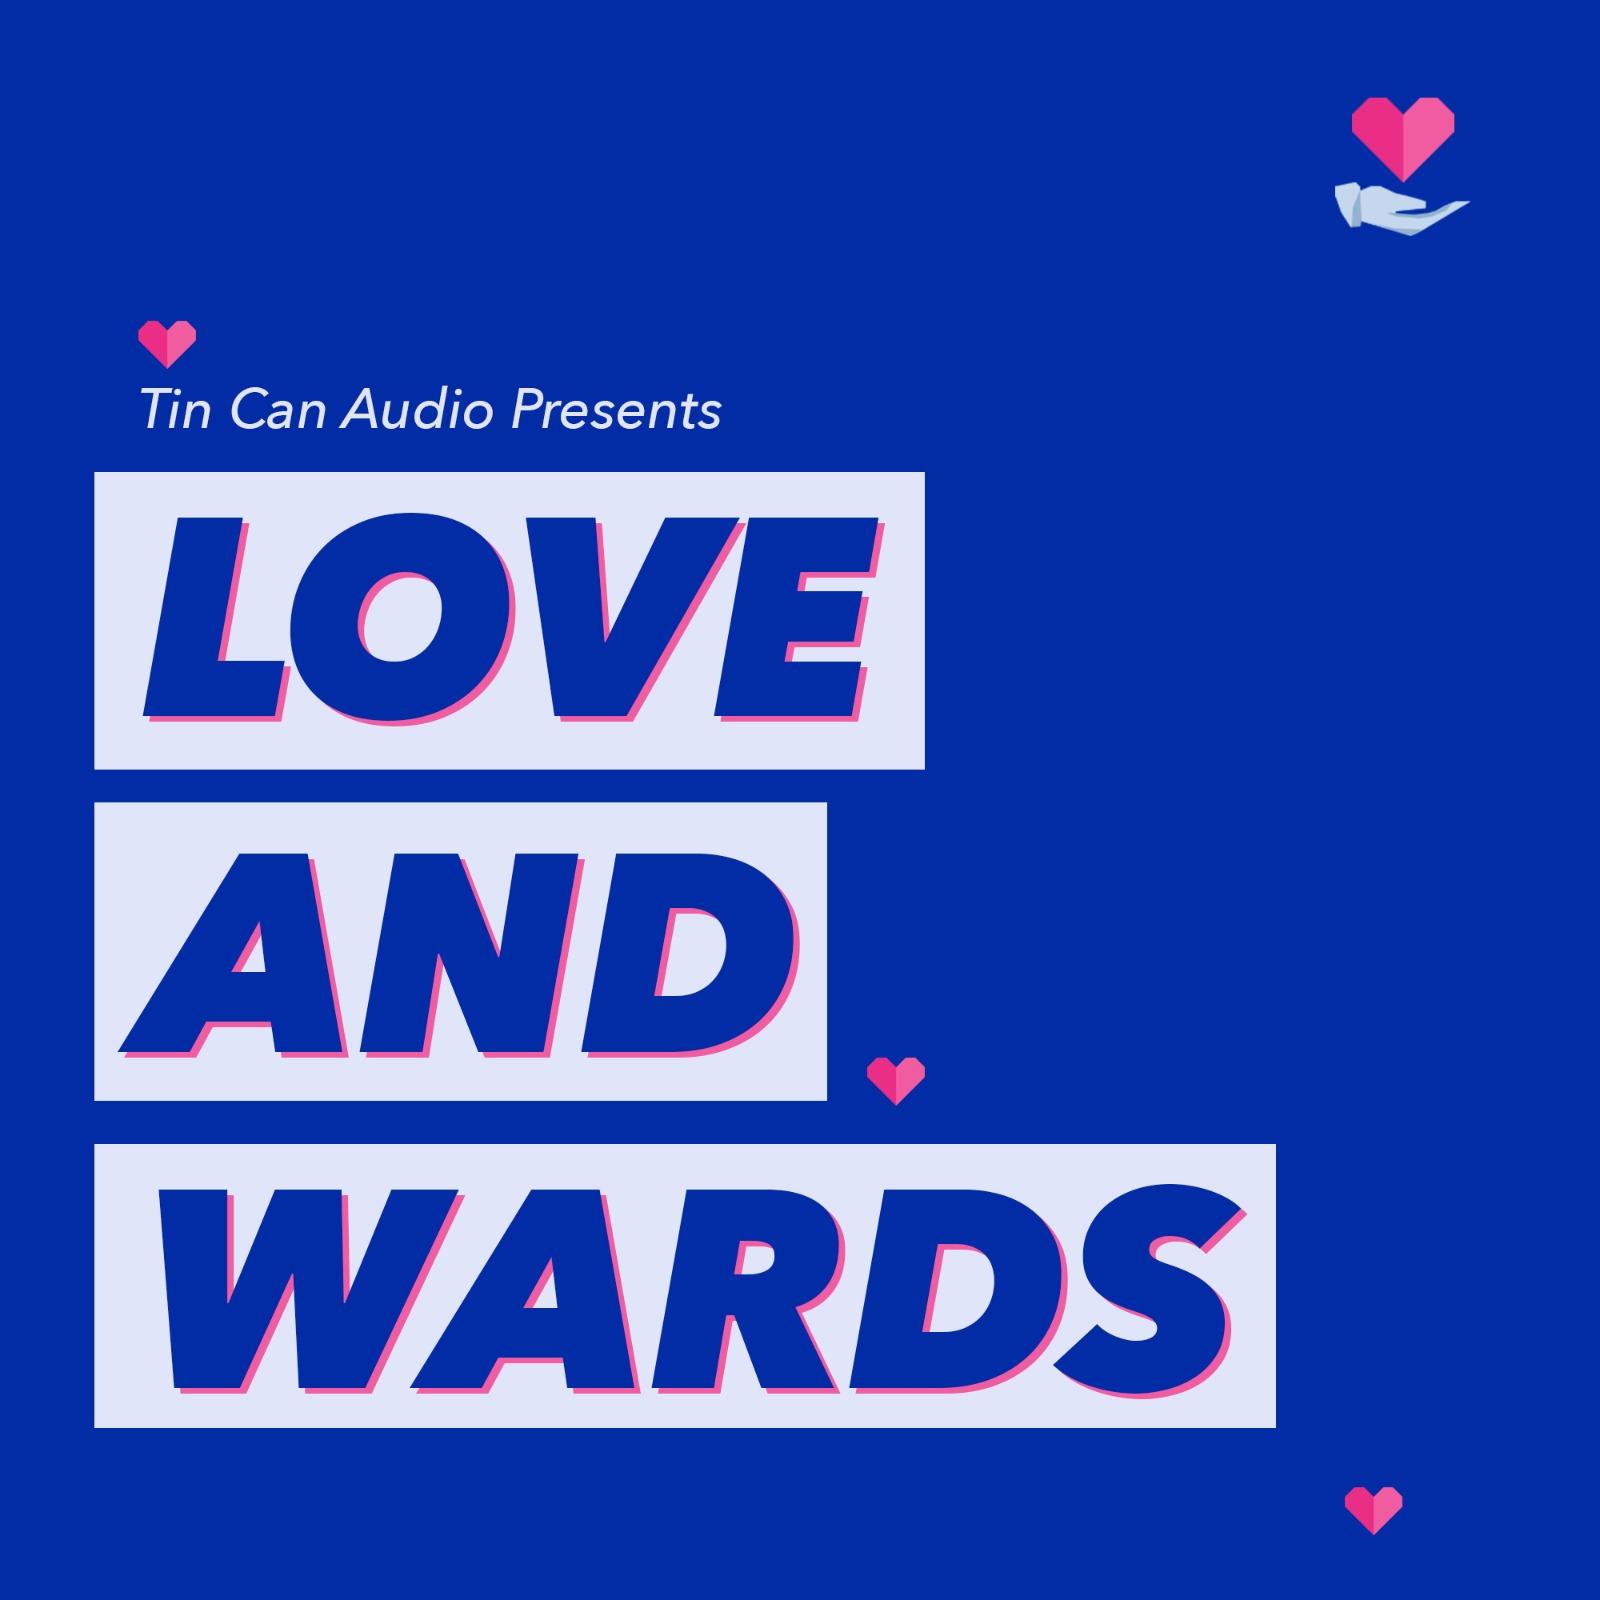 OUR NEW SHOW - ’Love & Wards: Conversations With My Parents’